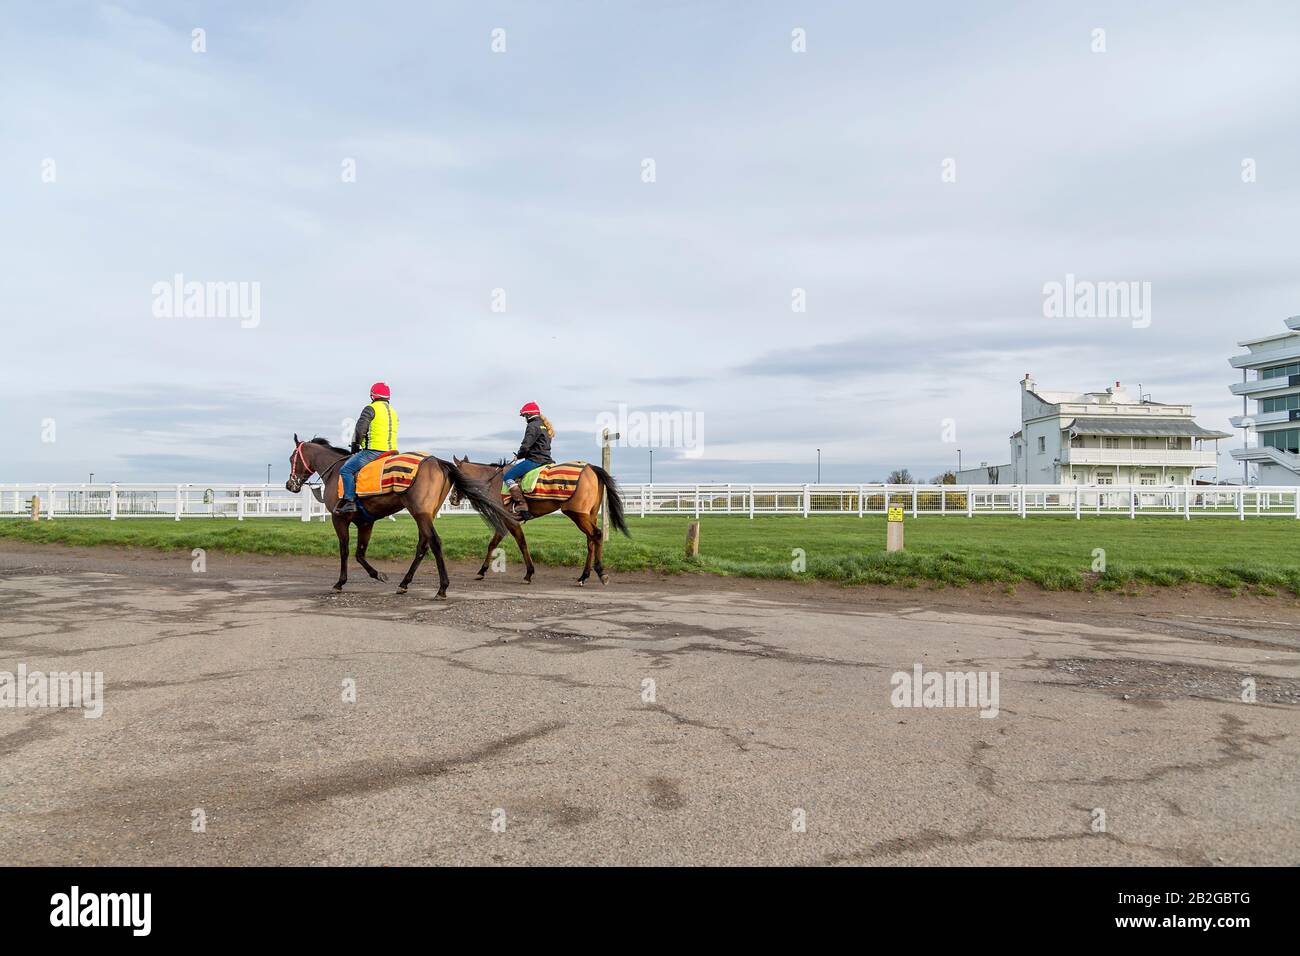 A male and female jockey exercise horses at Epsom Downs racecourse. The Princes Stand can be seen to the right of the photograph. Stock Photo